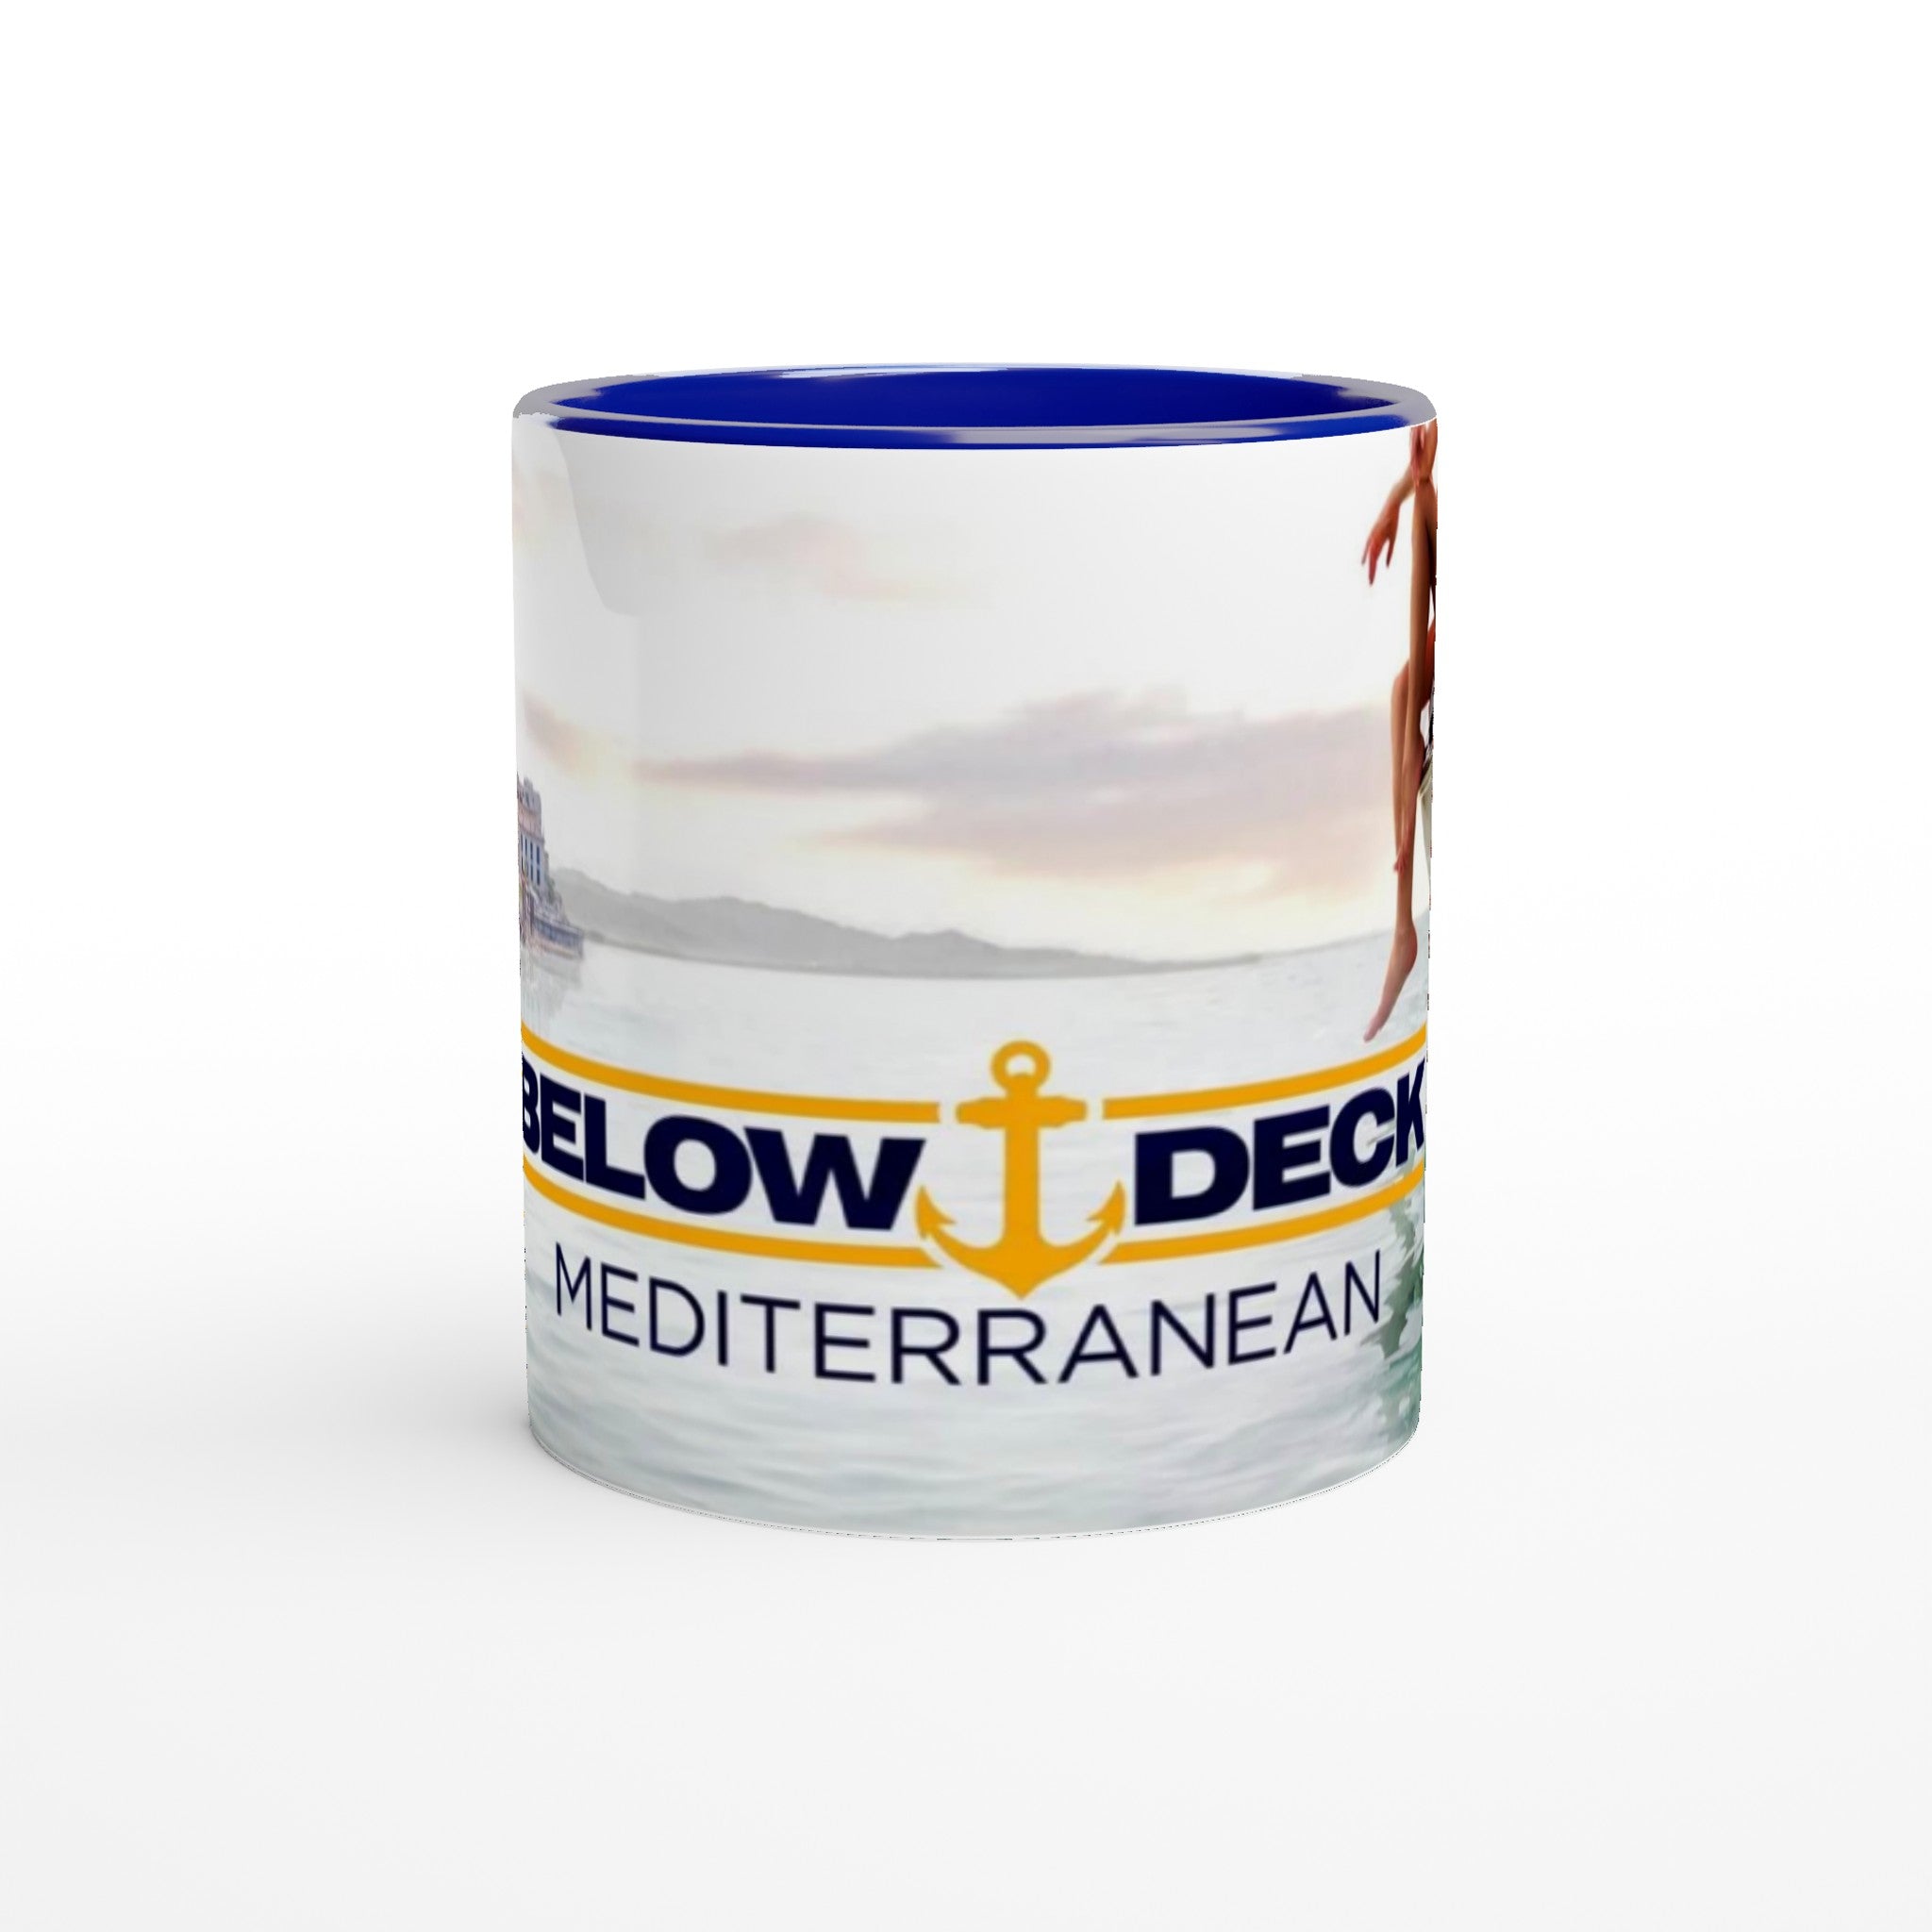 Below Deck Med- White 11oz Ceramic Mug with Color Inside - Creations by Chris and Carlos